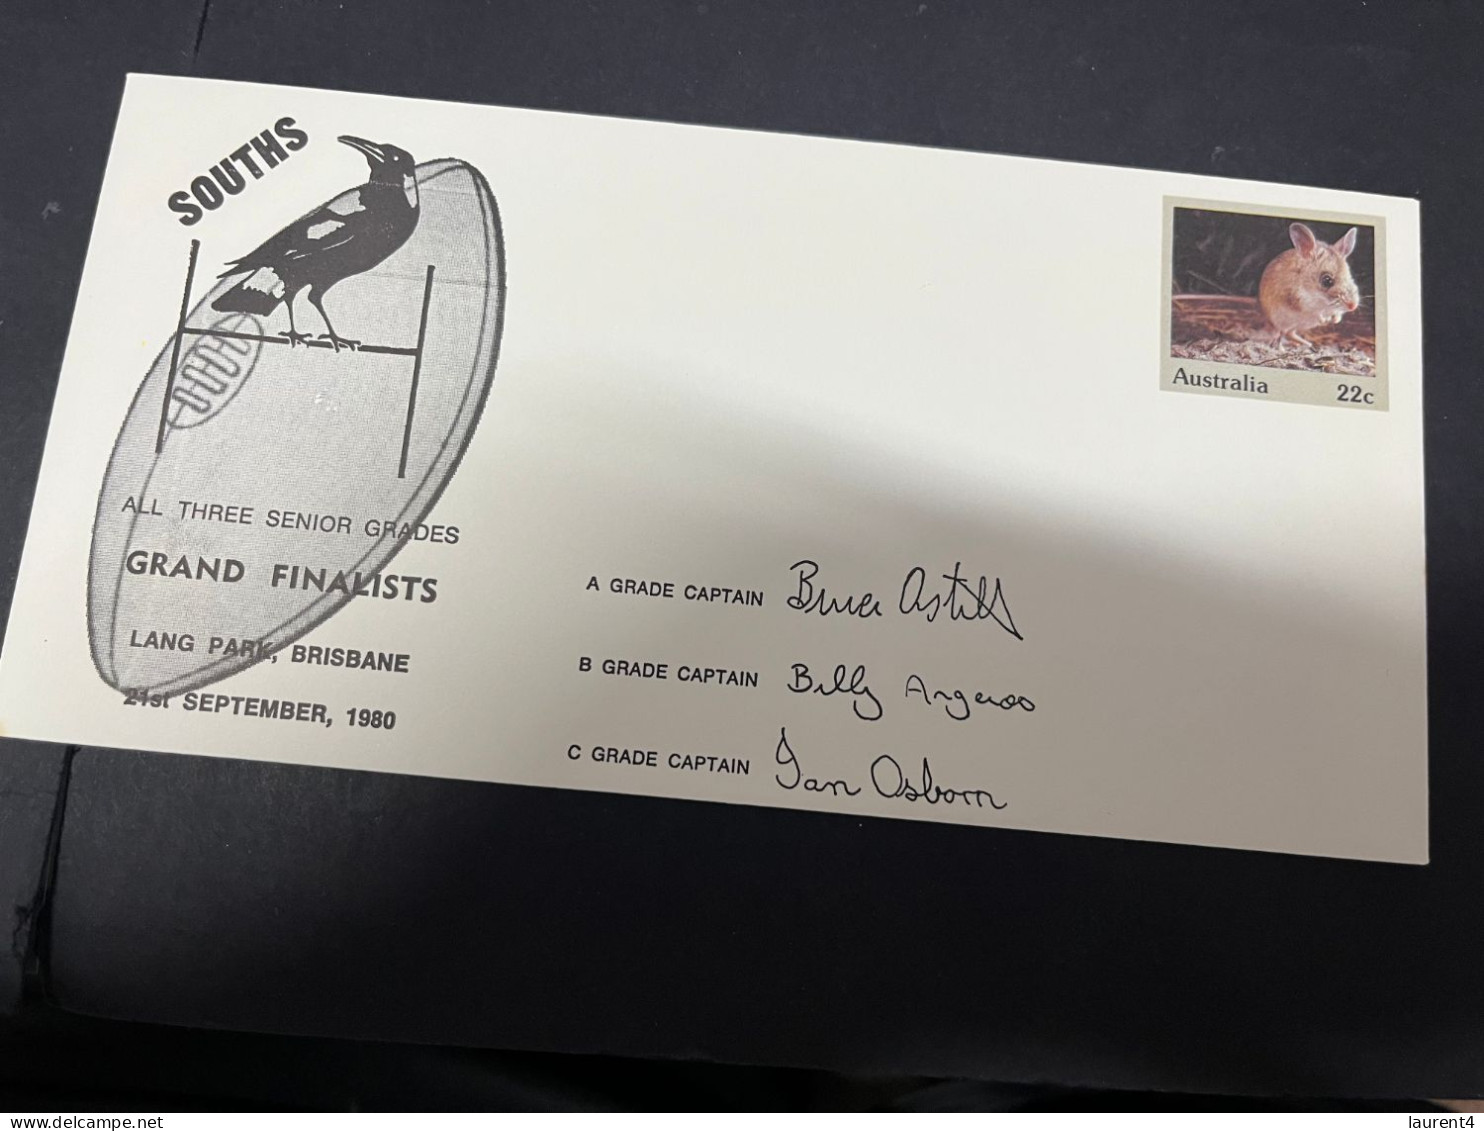 30-4-2023 (3 Z 29) Australia FDC (1 Covers) 1980 - OZ Football - South (magpies) Grand Finalists (signed - Hoping Mouse) - Ersttagsbelege (FDC)